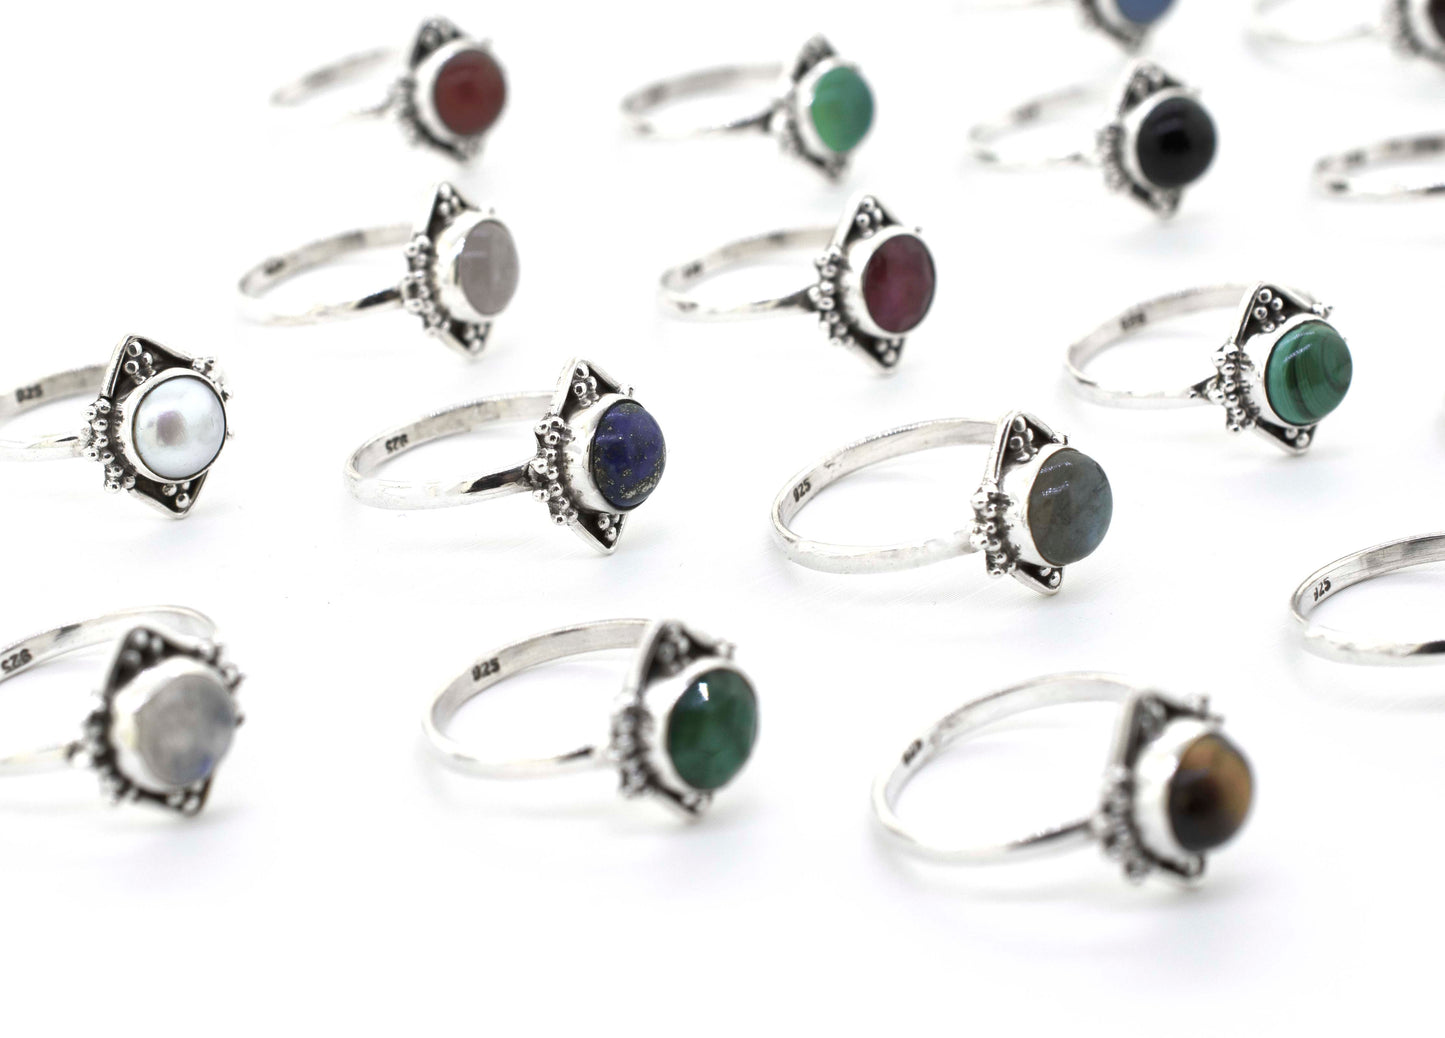 A group of Round Gemstone Rings With Oxidized Diamond Shape Pattern with different colored stones.